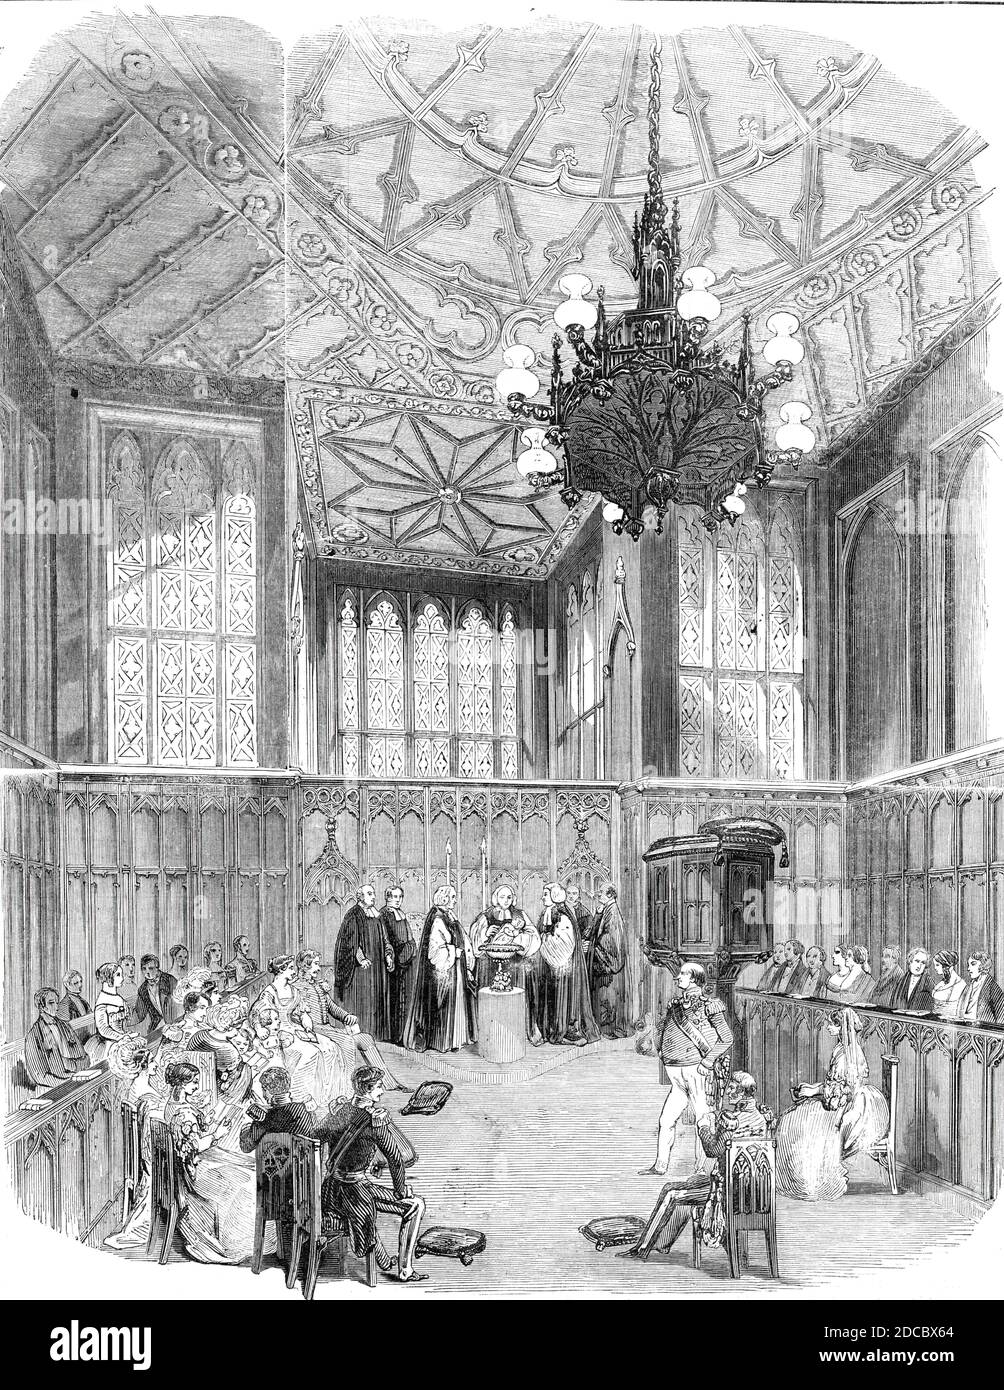 Christening of Prince Alfred in the Private Chapel, Windsor Castle, 1844. Queen Victoria's son Alfred, Duke of Saxe-Coburg and Gotha, is baptised by William Howley, Archbishop of Canterbury. From &quot;Illustrated London News&quot;, 1844, Vol I. Stock Photo